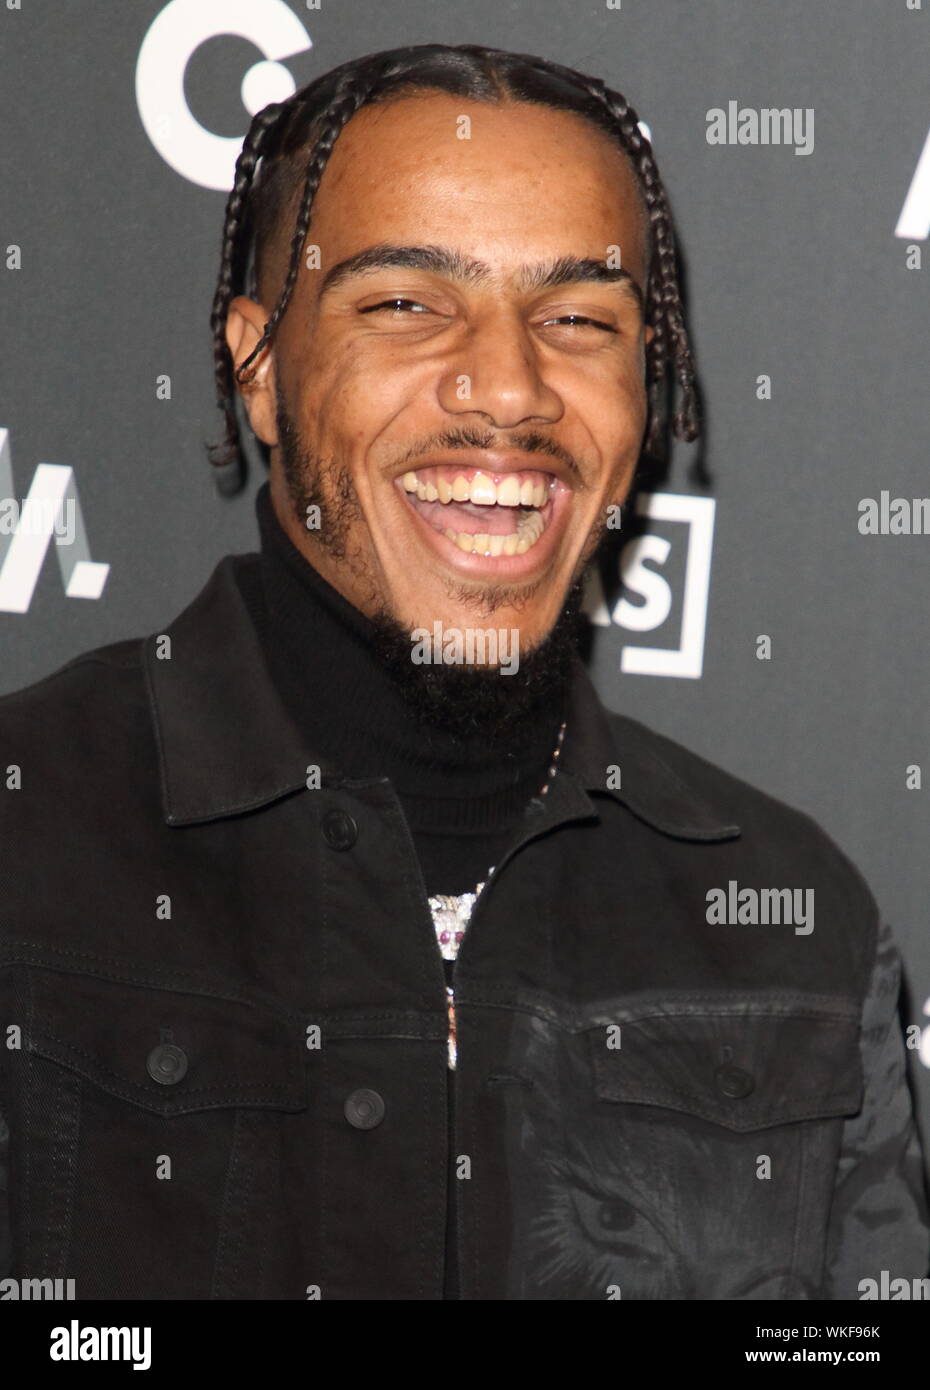 Rapper AJ Tracey on the red carpet arrivals board during the AIM Independent Music Awards 2019 held at the Roundhouse in London. Stock Photo